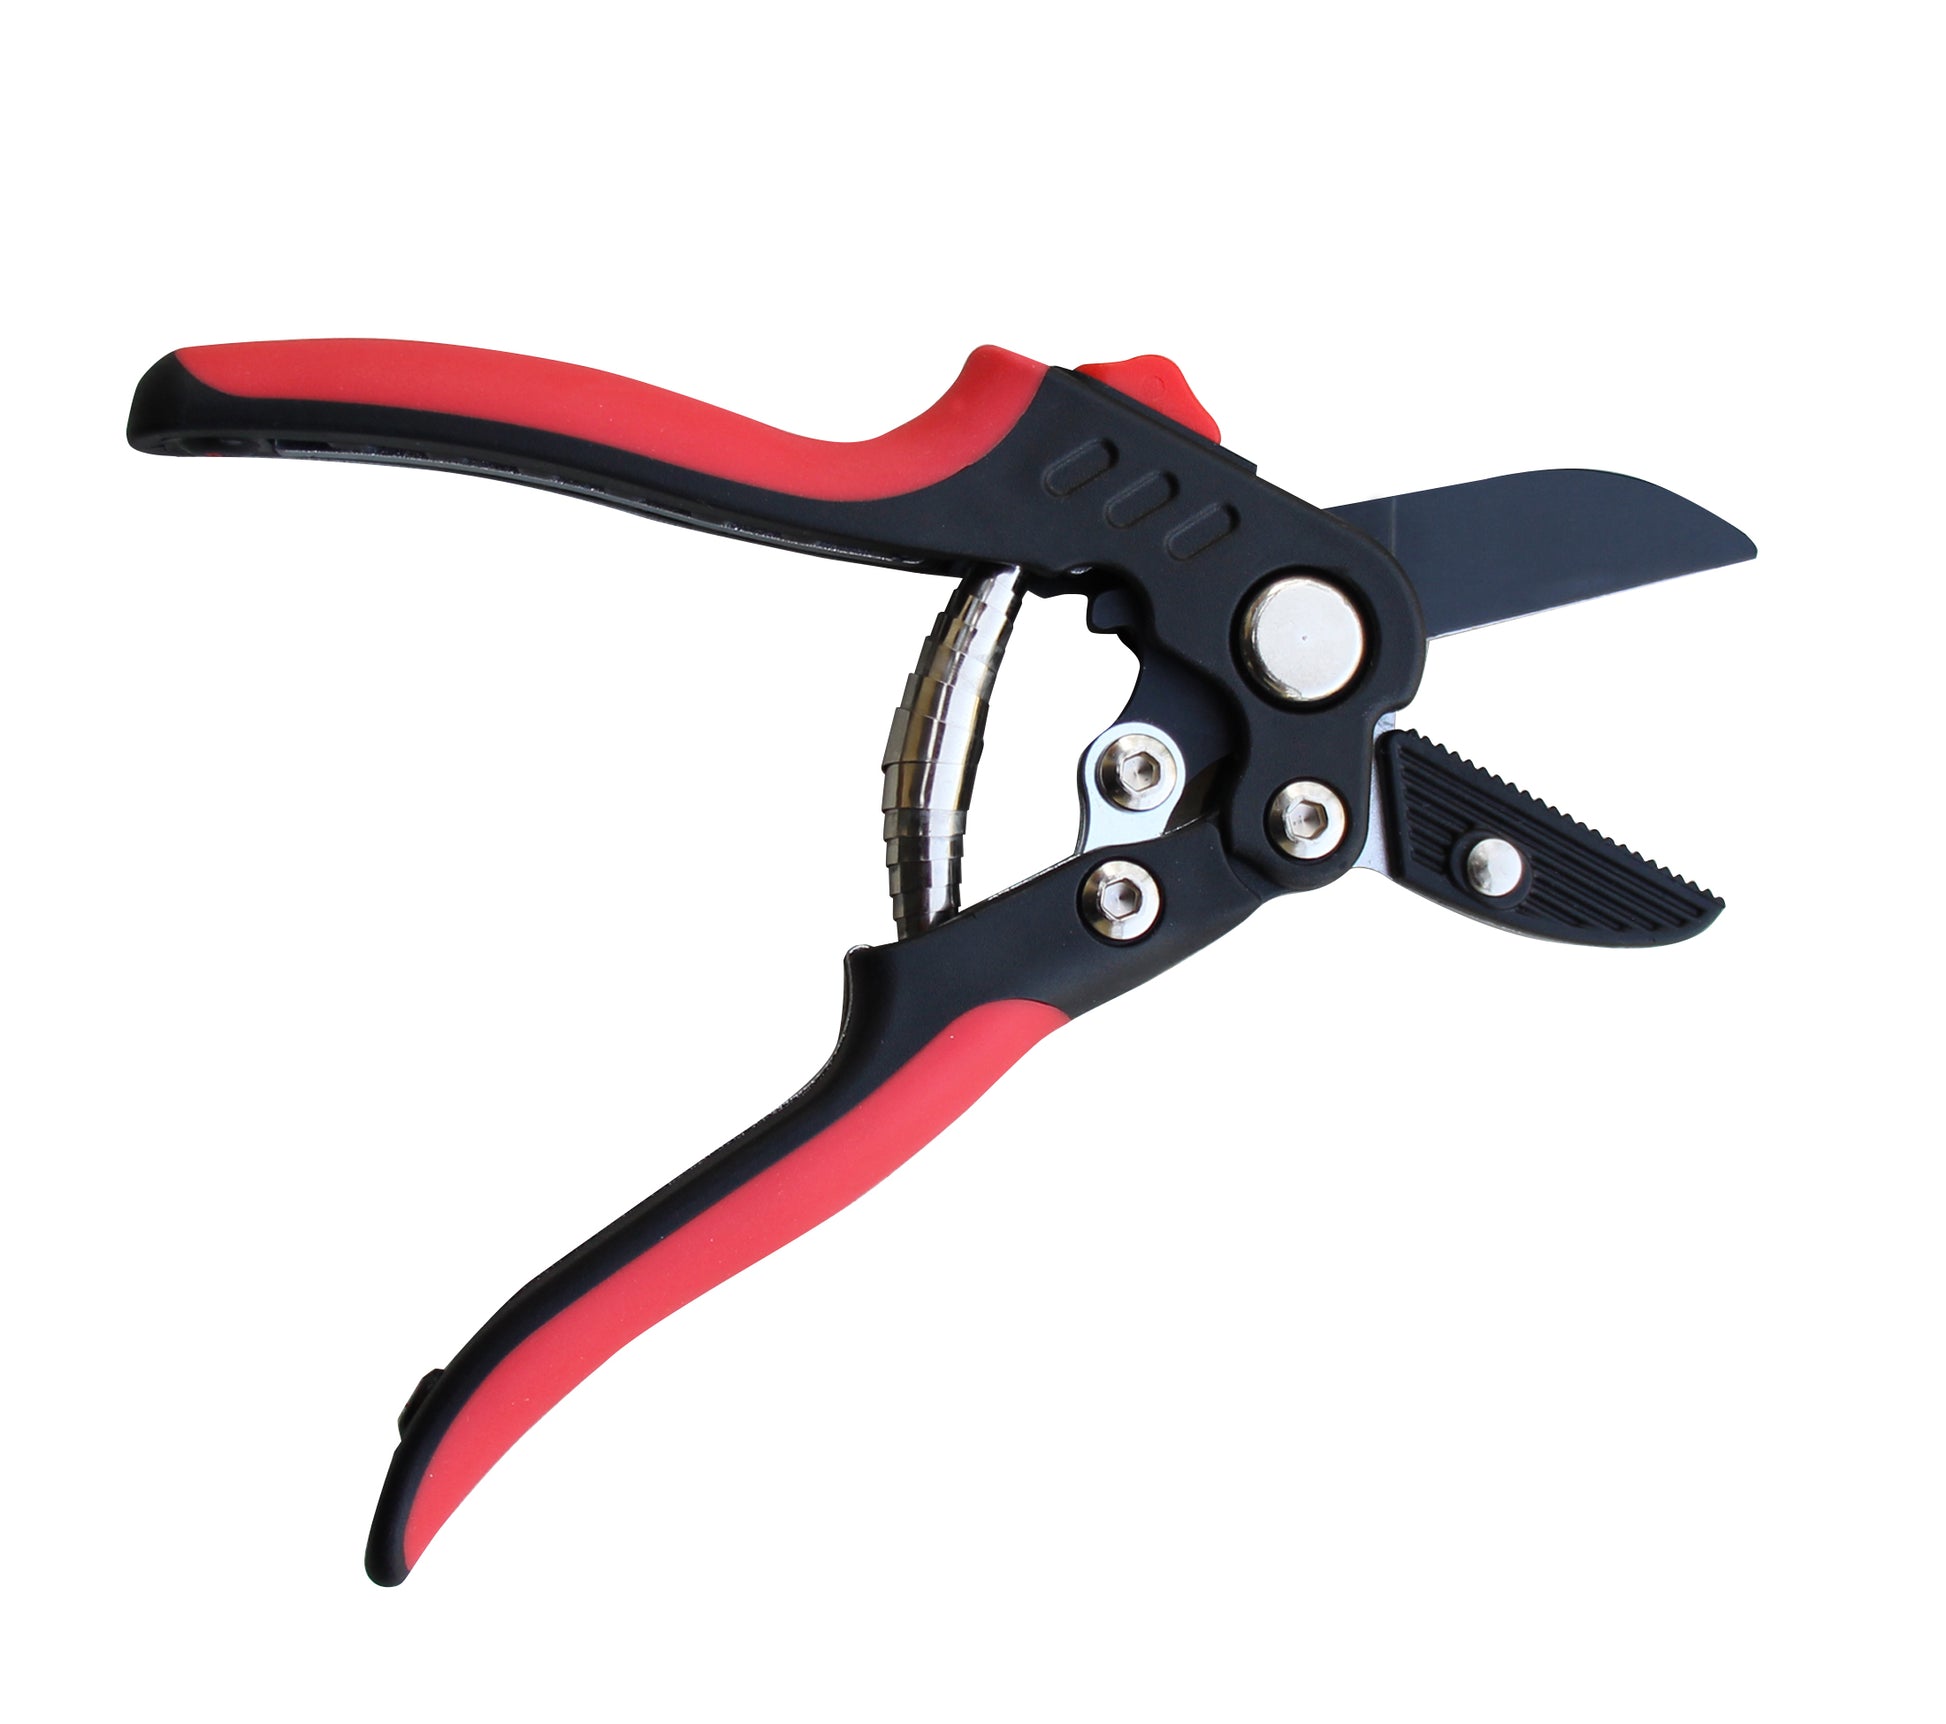 TABOR TOOLS K18A Pruning Shears with Straight Japanese Style